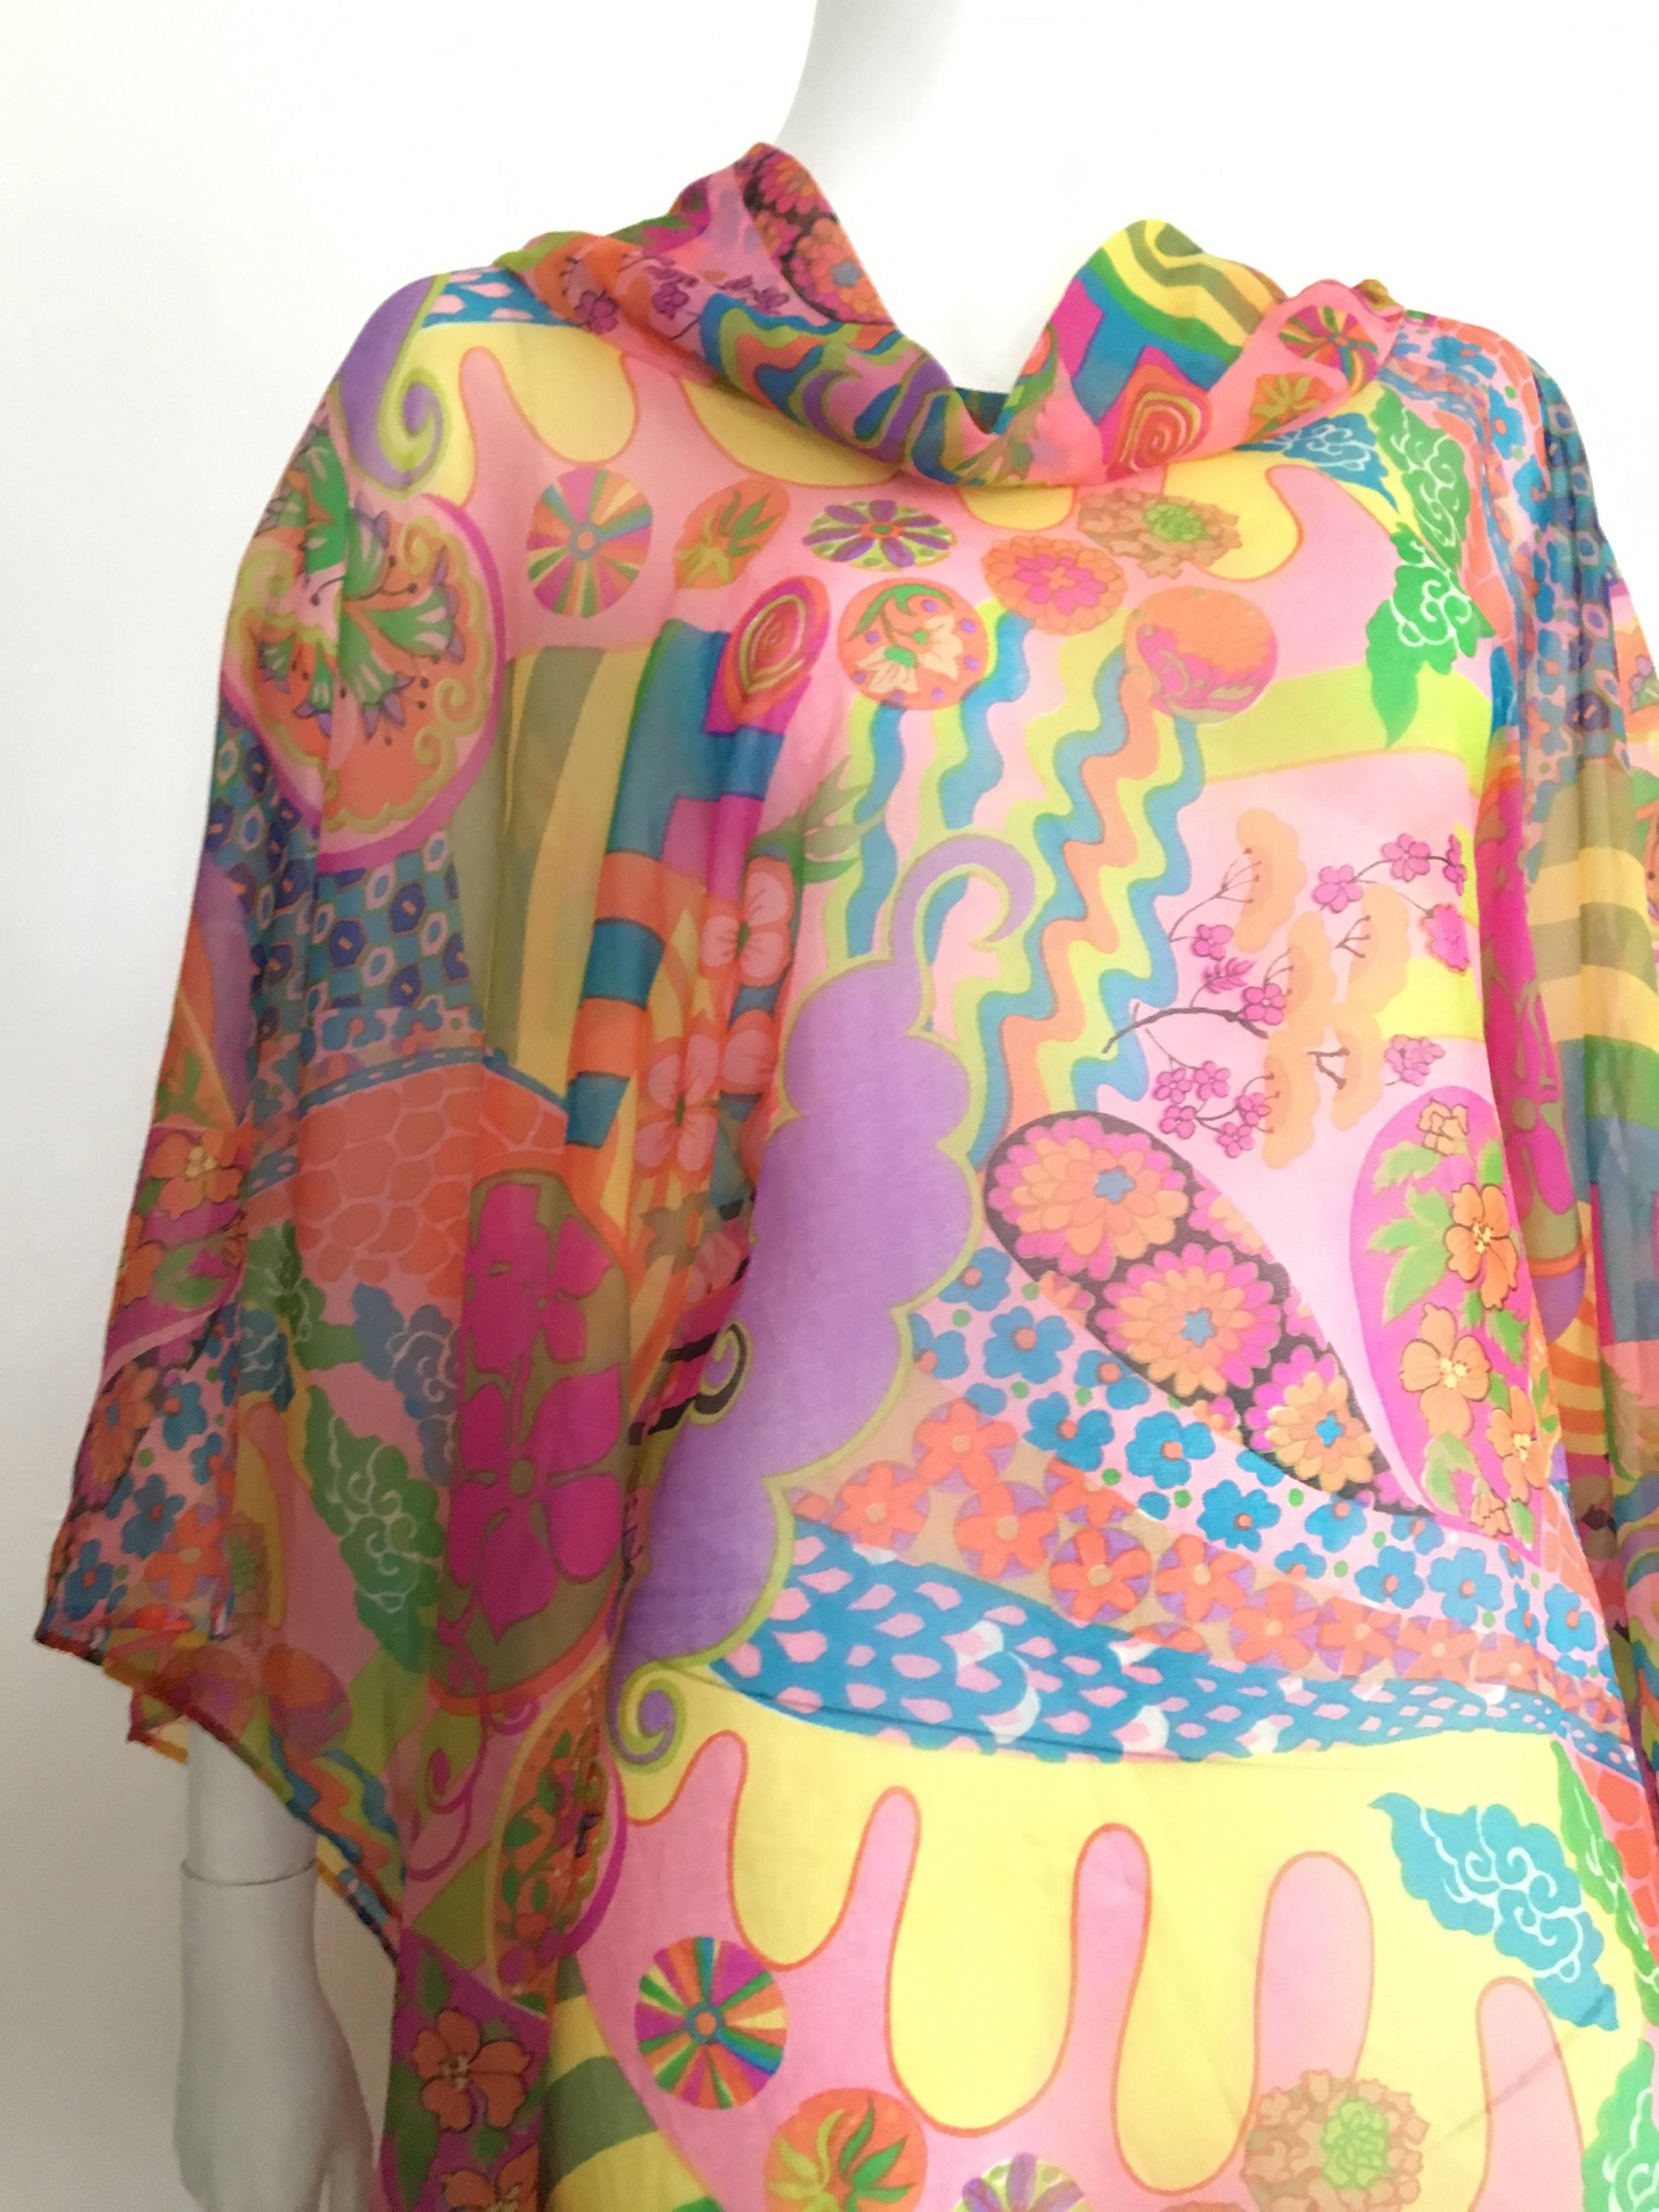 I.Magnin 1960s psychedelic pattern caftan will fit a size 4-6-8.  Please see & use the measurements listed below so that you may properly measure your lovely body to make certain this will fit. Edges are handrolled. Worn with your vintage Celine